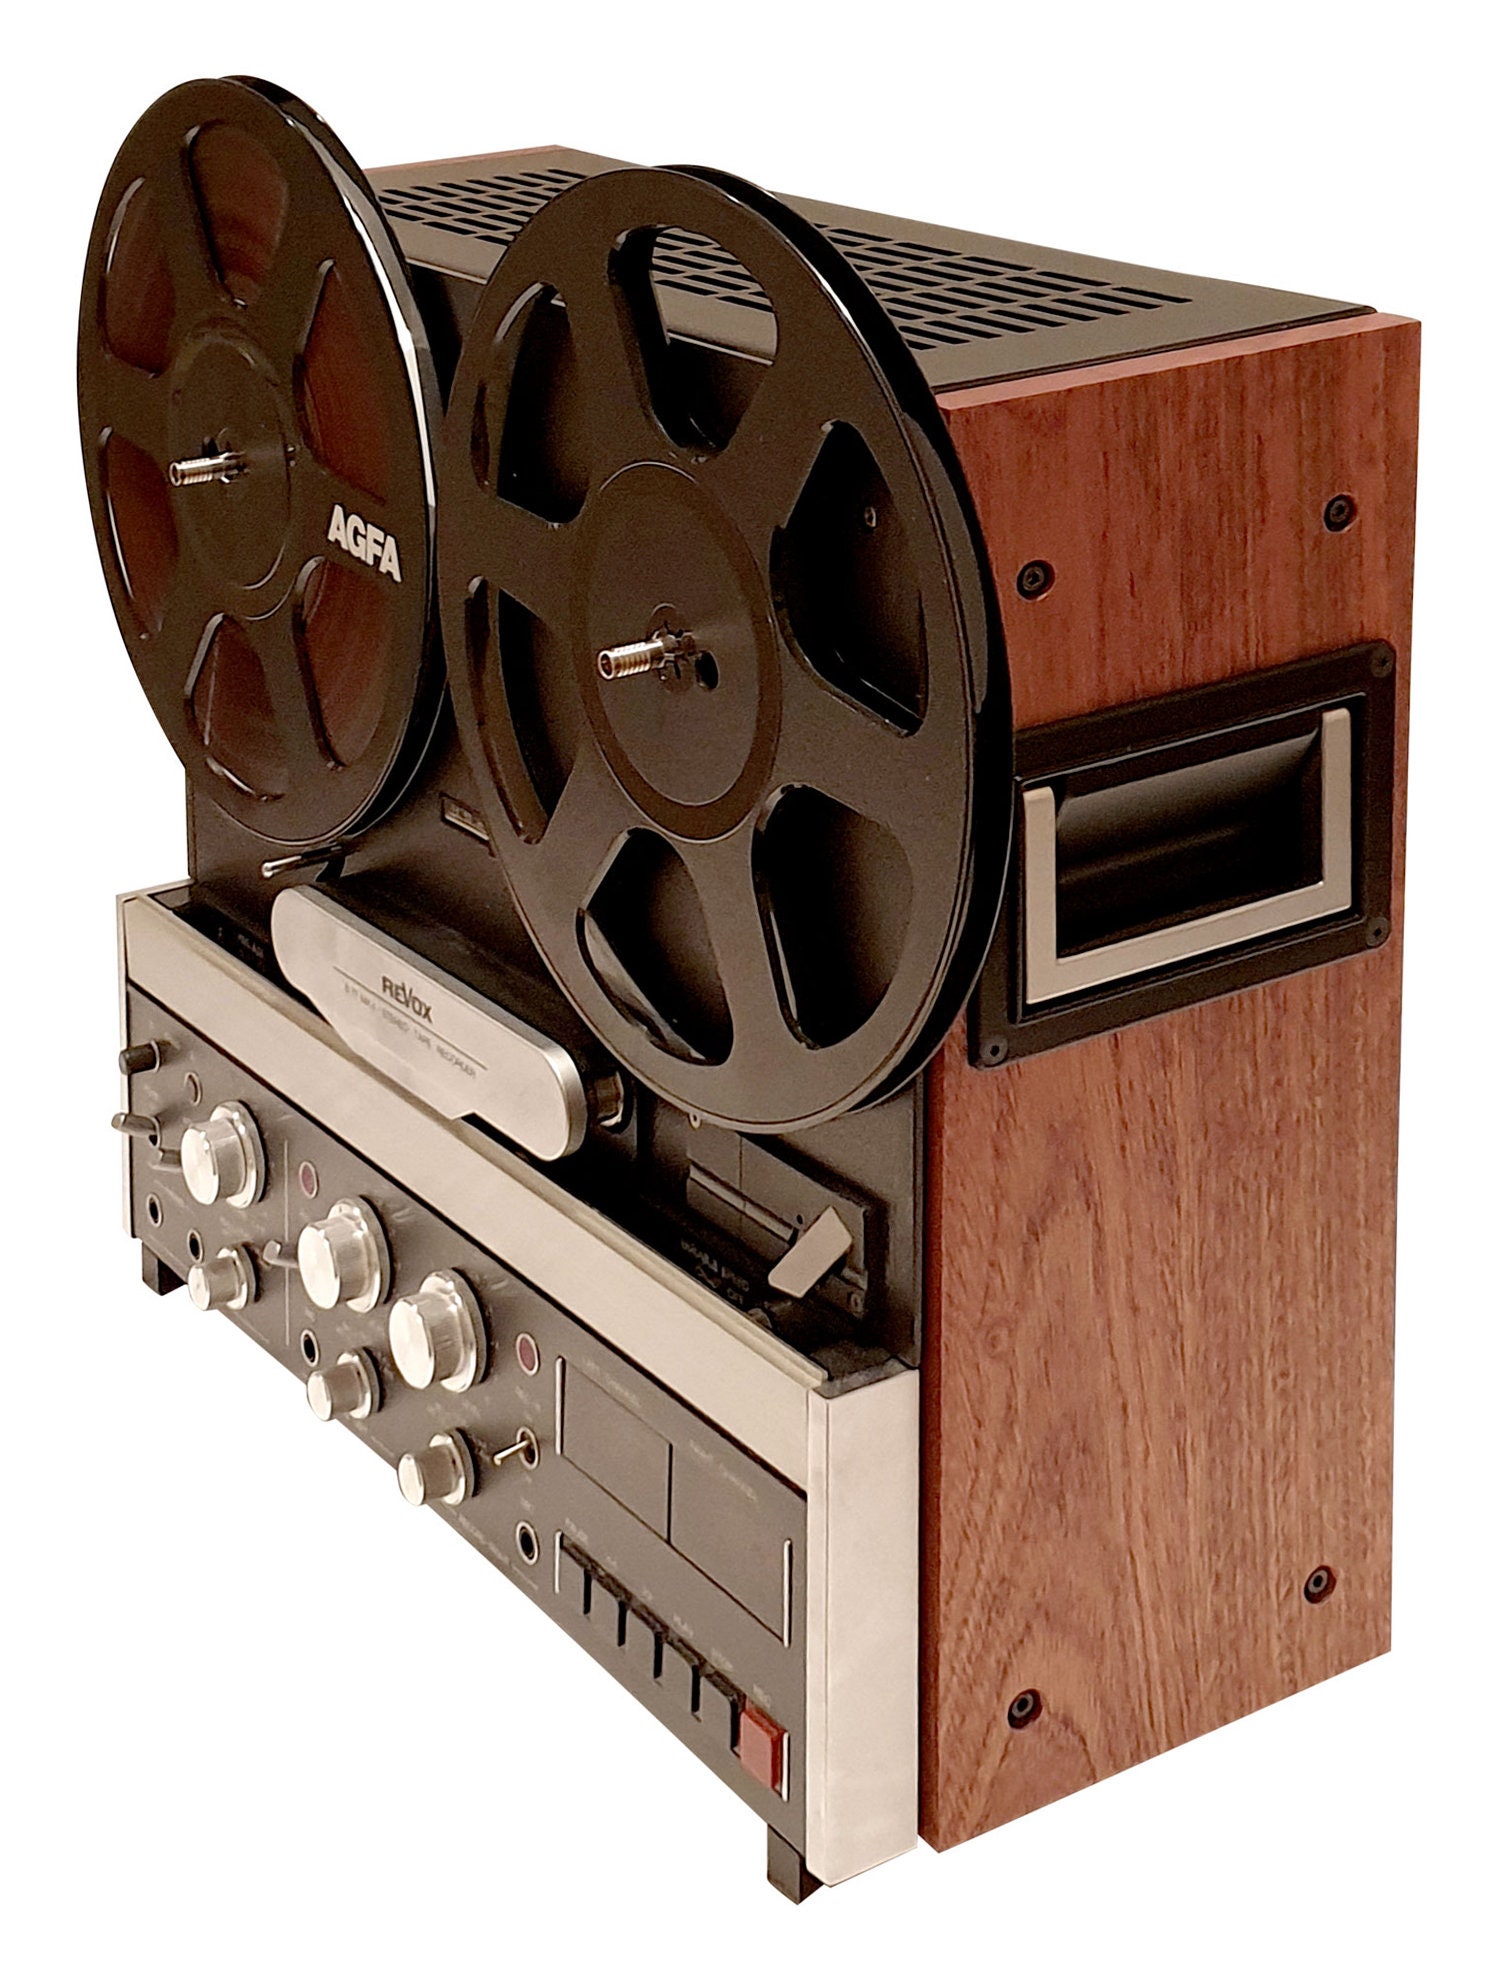 Buy REEL TO REEL TAPE RECORDER Online In India -  India